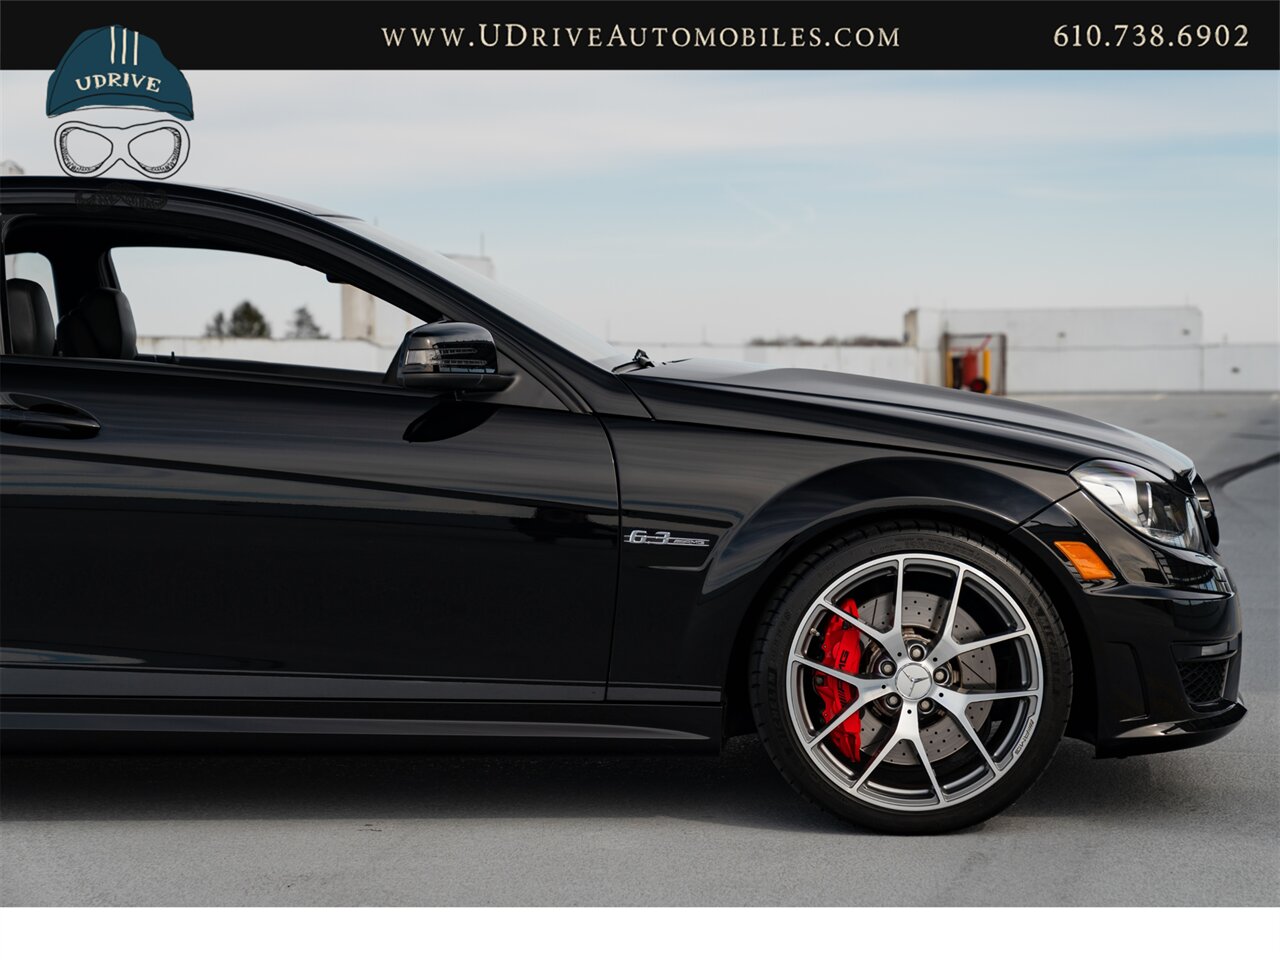 2015 Mercedes-Benz C63 AMG  Edition 507 17k Miles Pano Sunroof Locking Diff 507hp - Photo 16 - West Chester, PA 19382